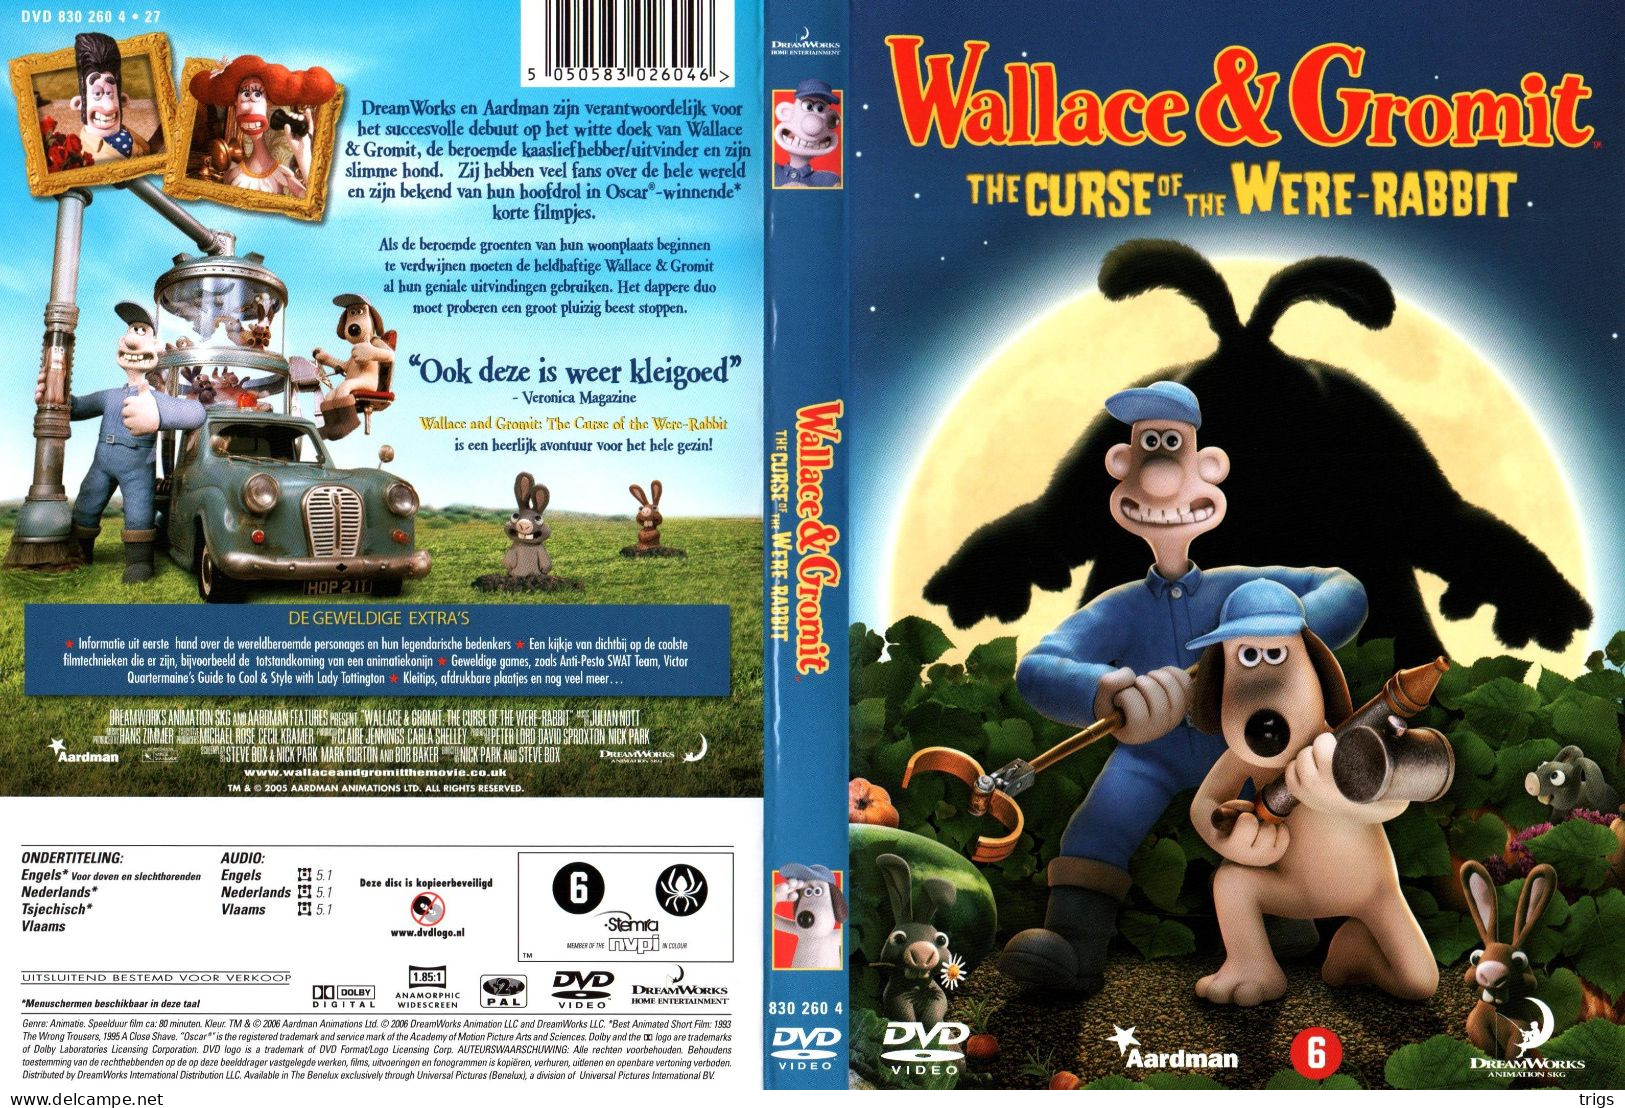 DVD - Wallace & Gromit: The Curse Of The Were-Rabbit - Animation